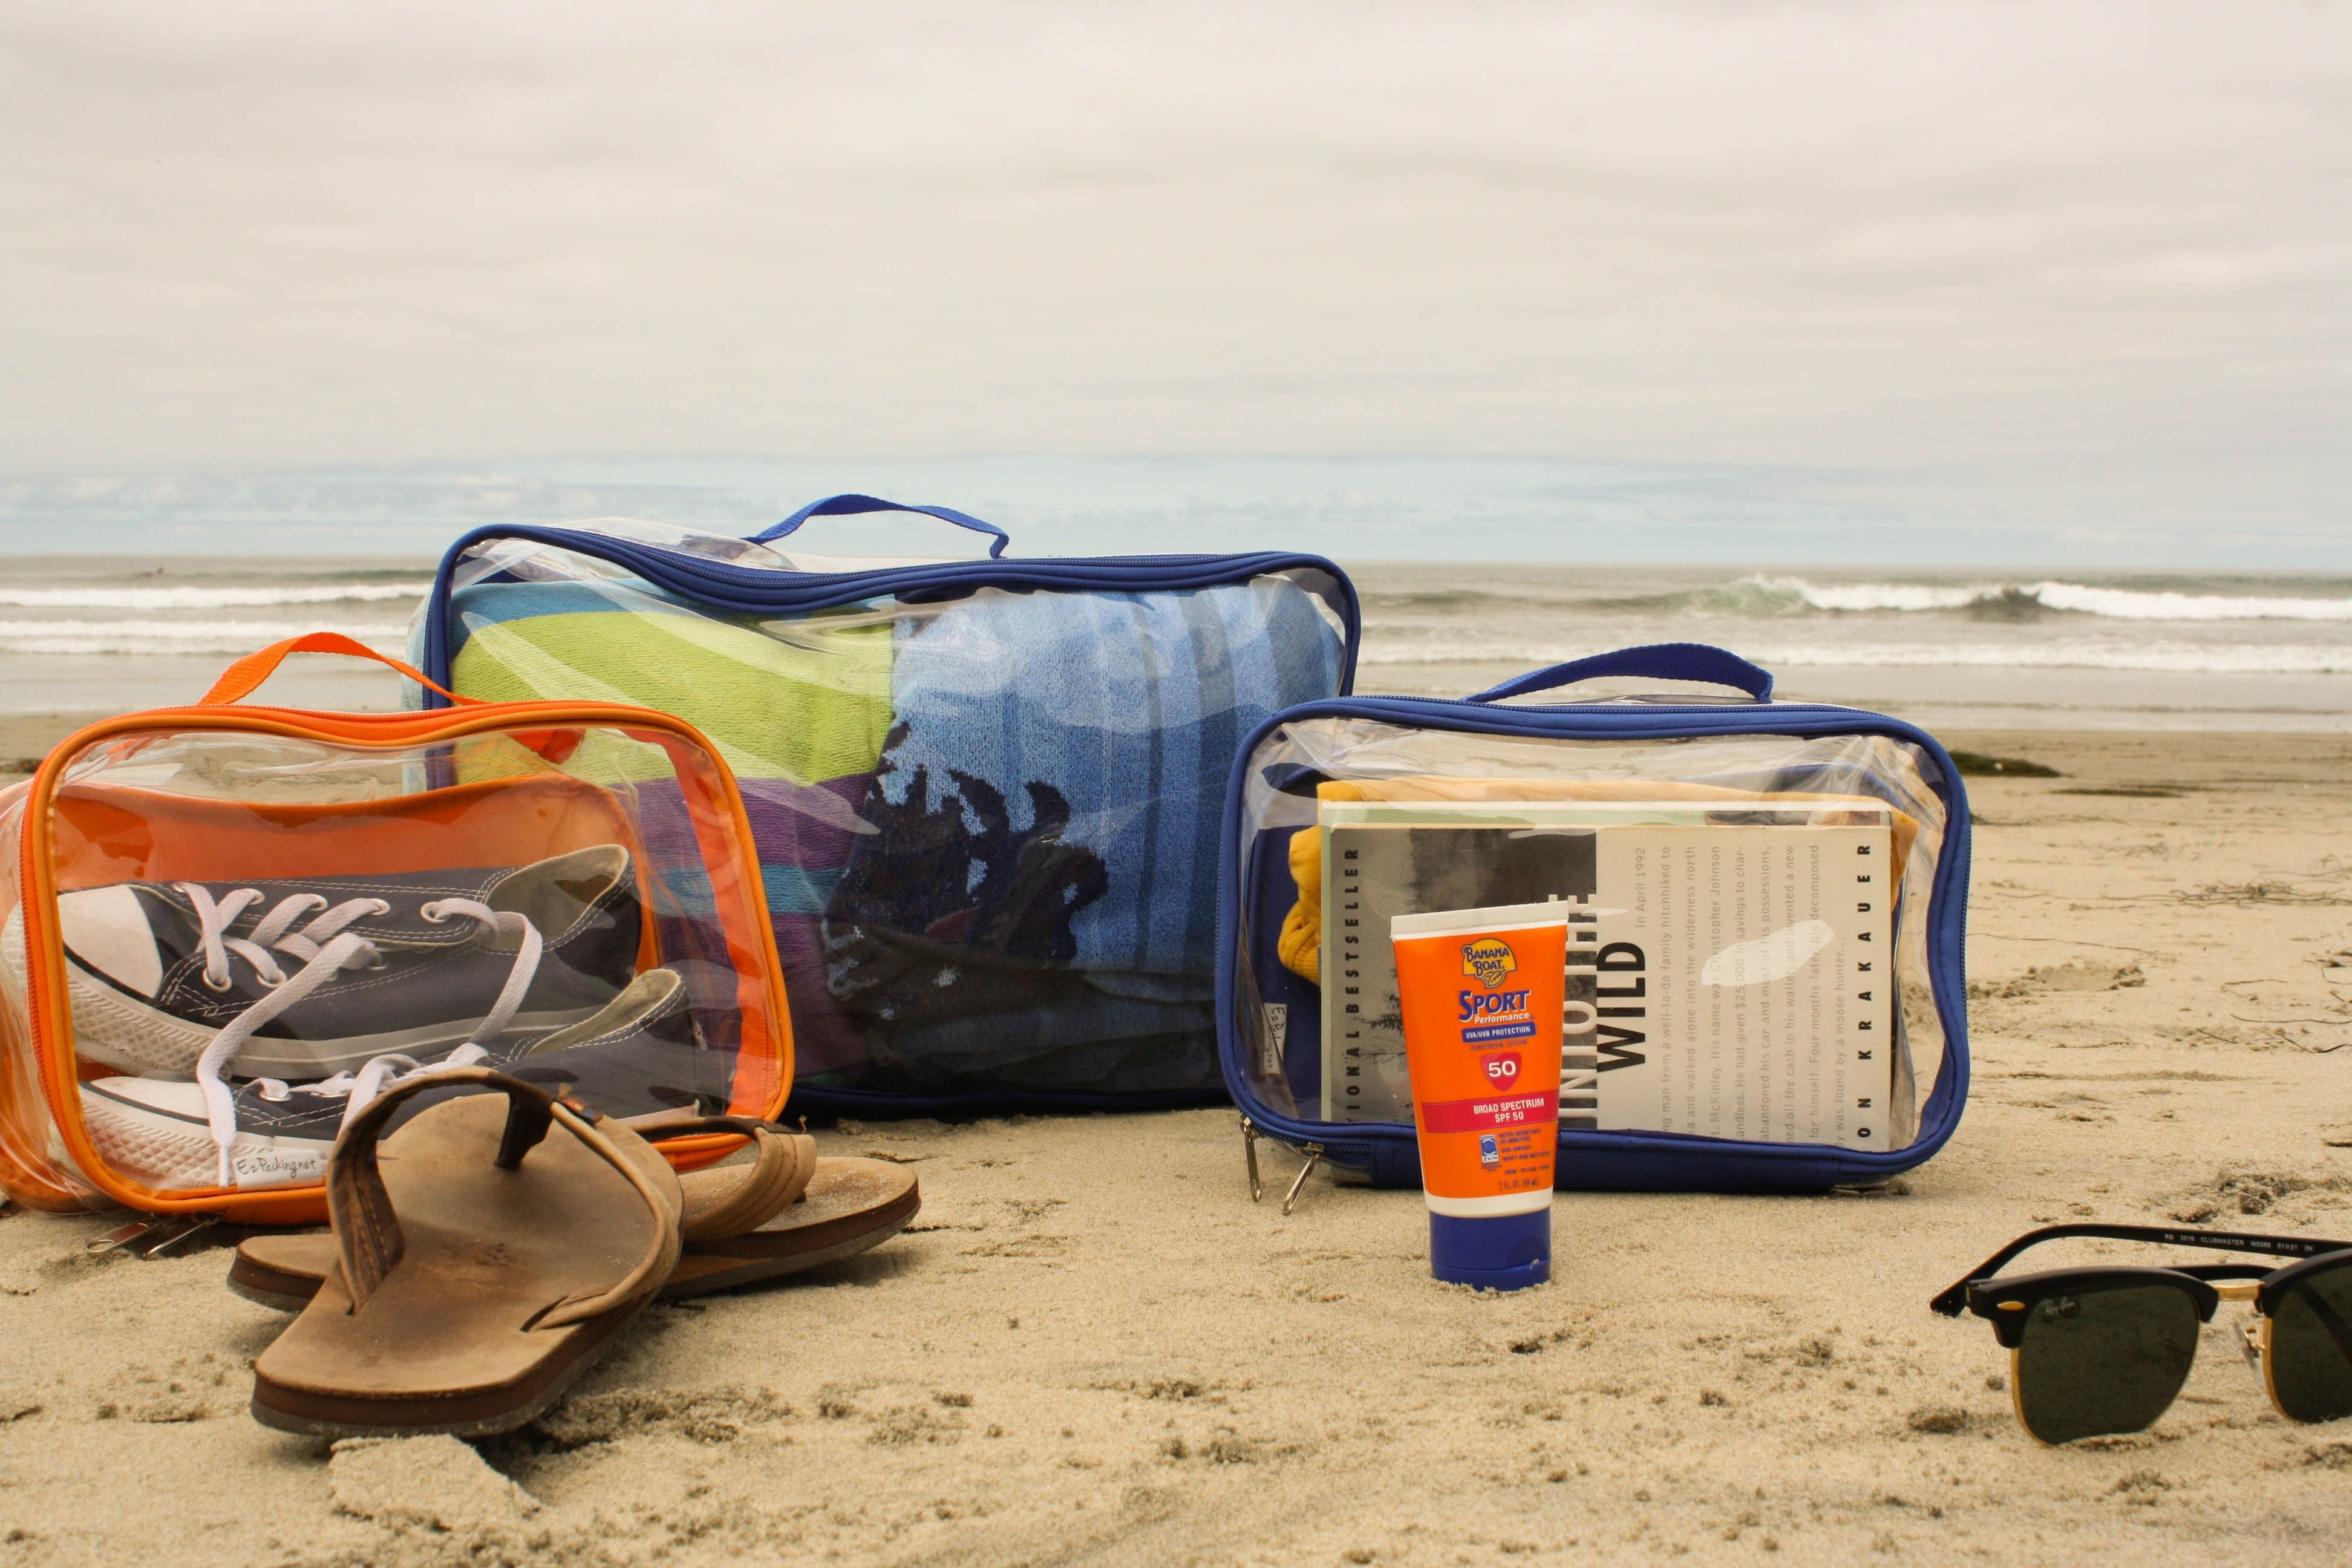 Beach essentials packed in clear packing cubes